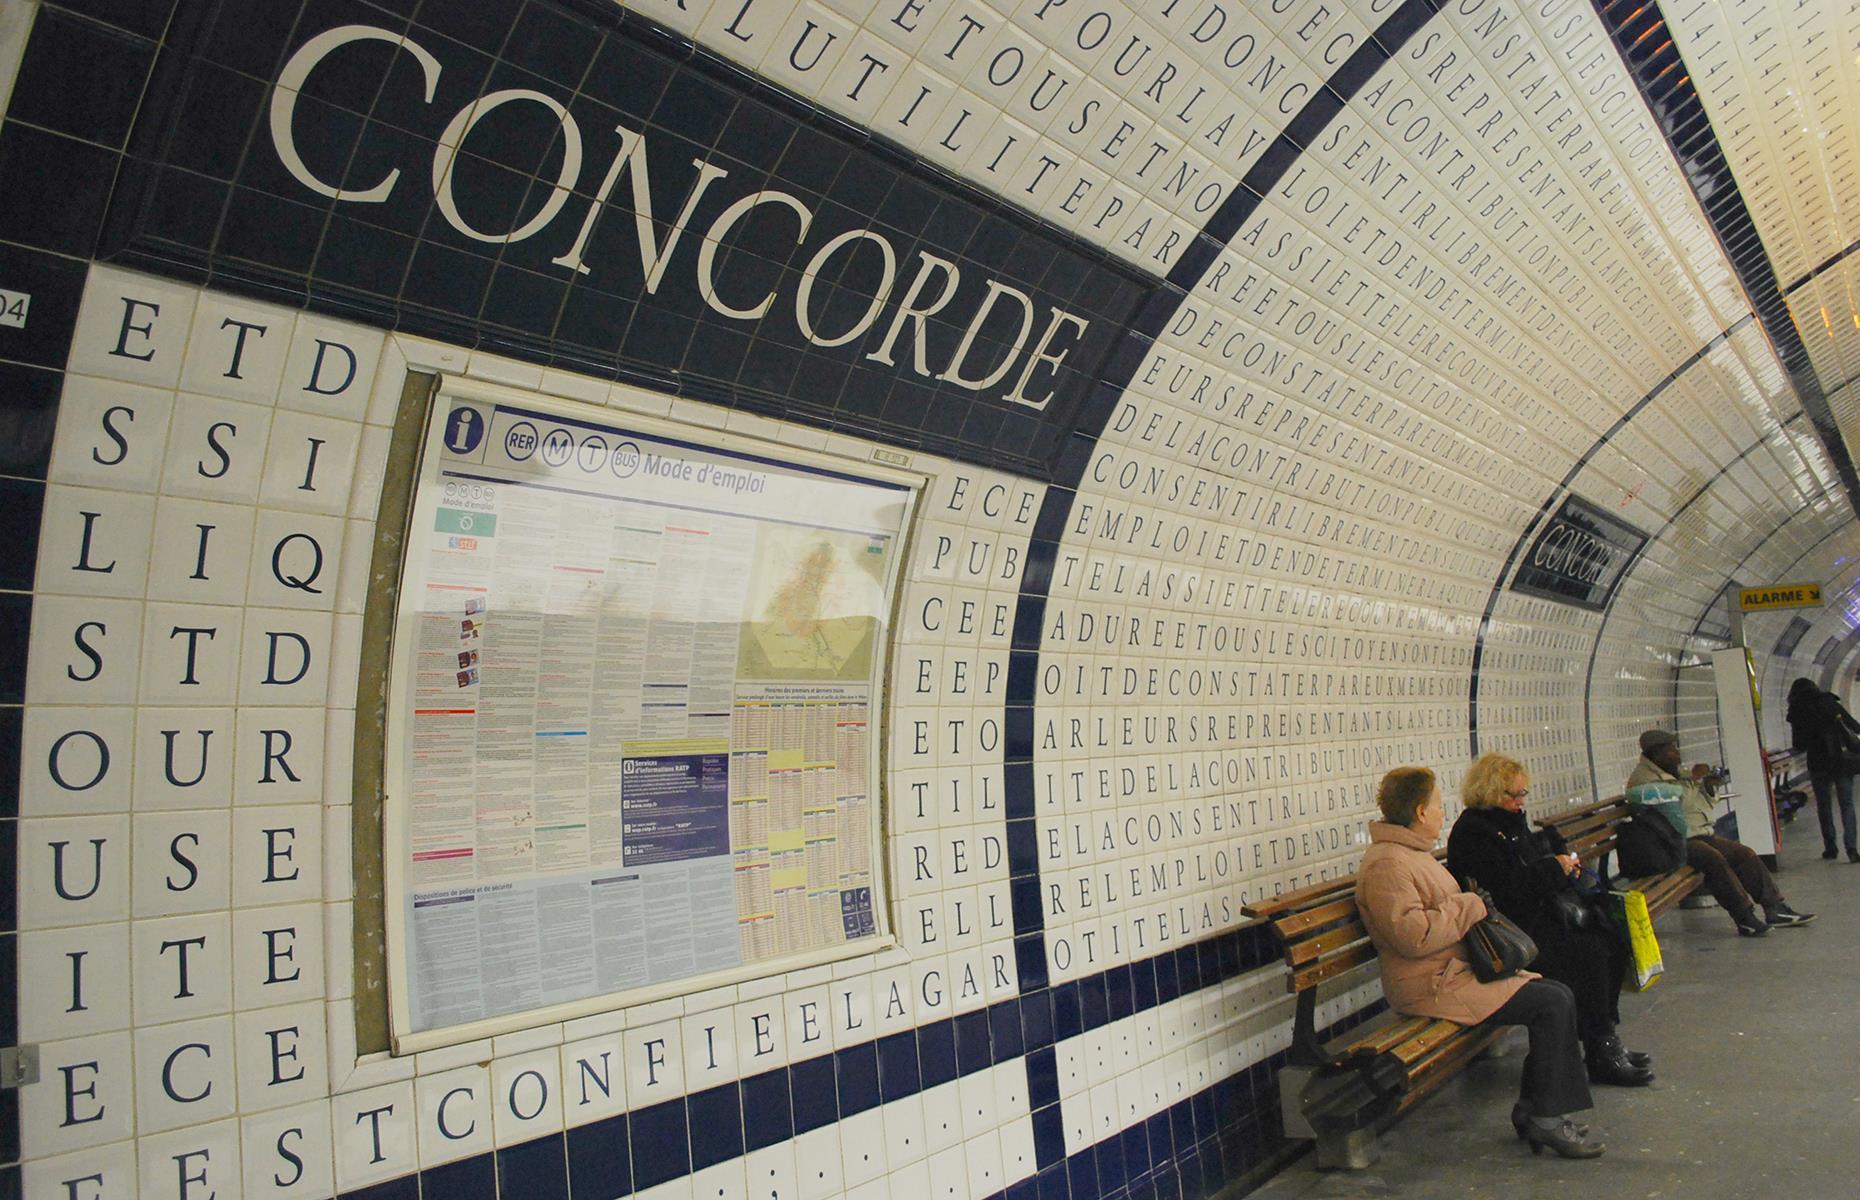 What might seem like a random jumble of letters is actually The Declaration of the Rights of Man and of the Citizen adorning the walls of Paris's Concorde station. Written during the French Revolution, the document is spelled out with blue letters on white tiles.